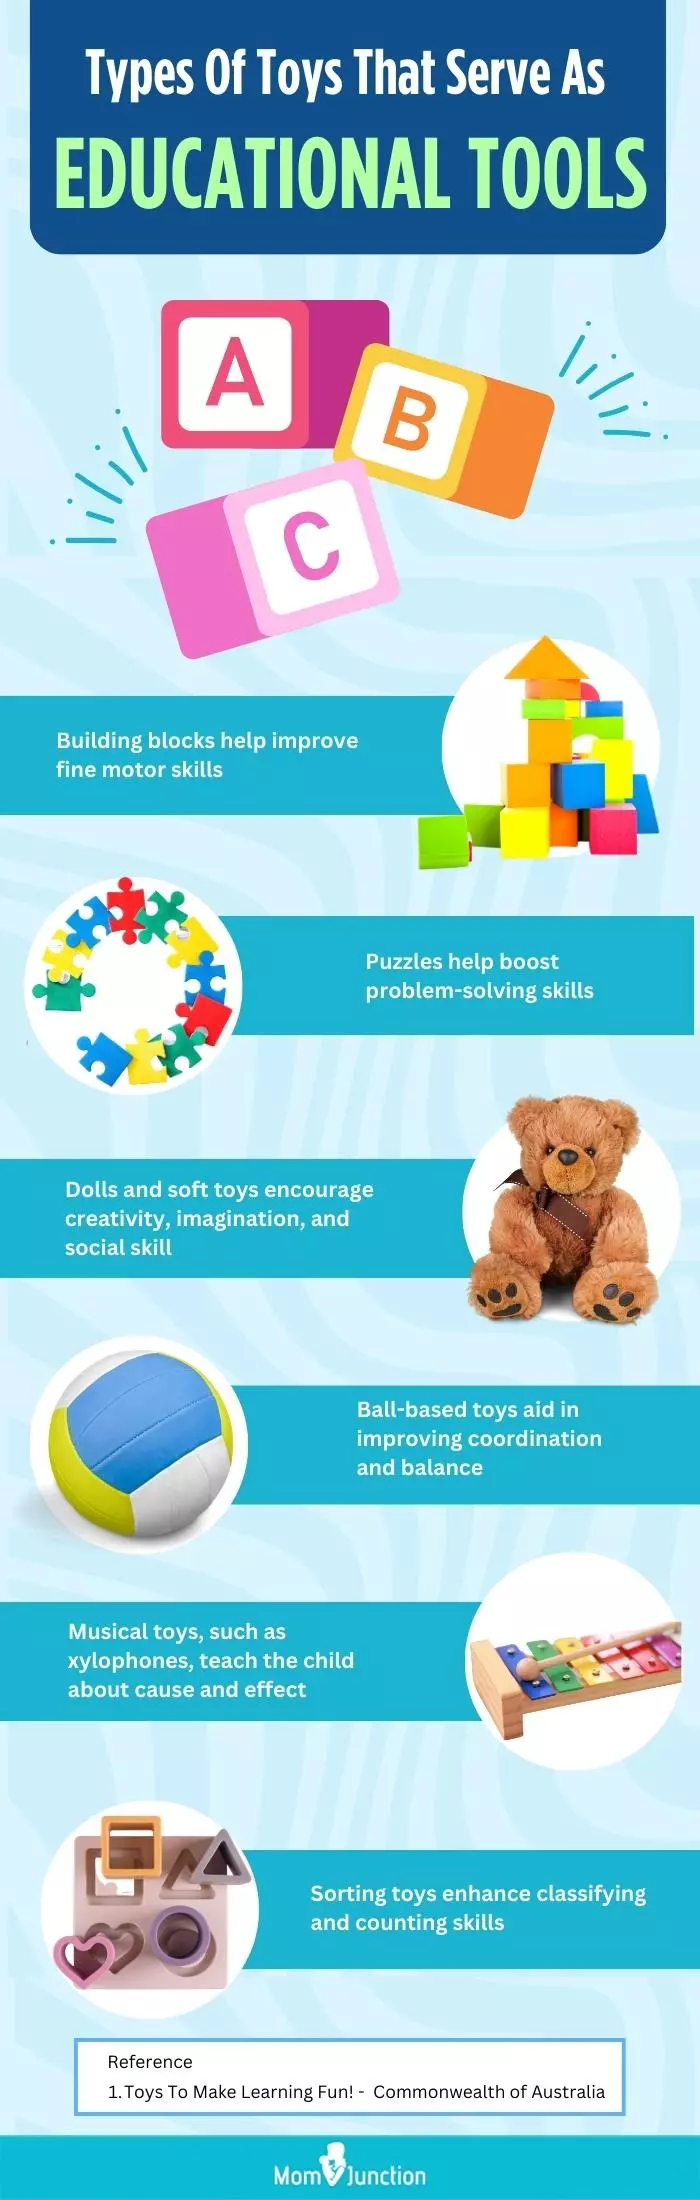 Types Of Toys That Serve As Educational Tools (infographic)